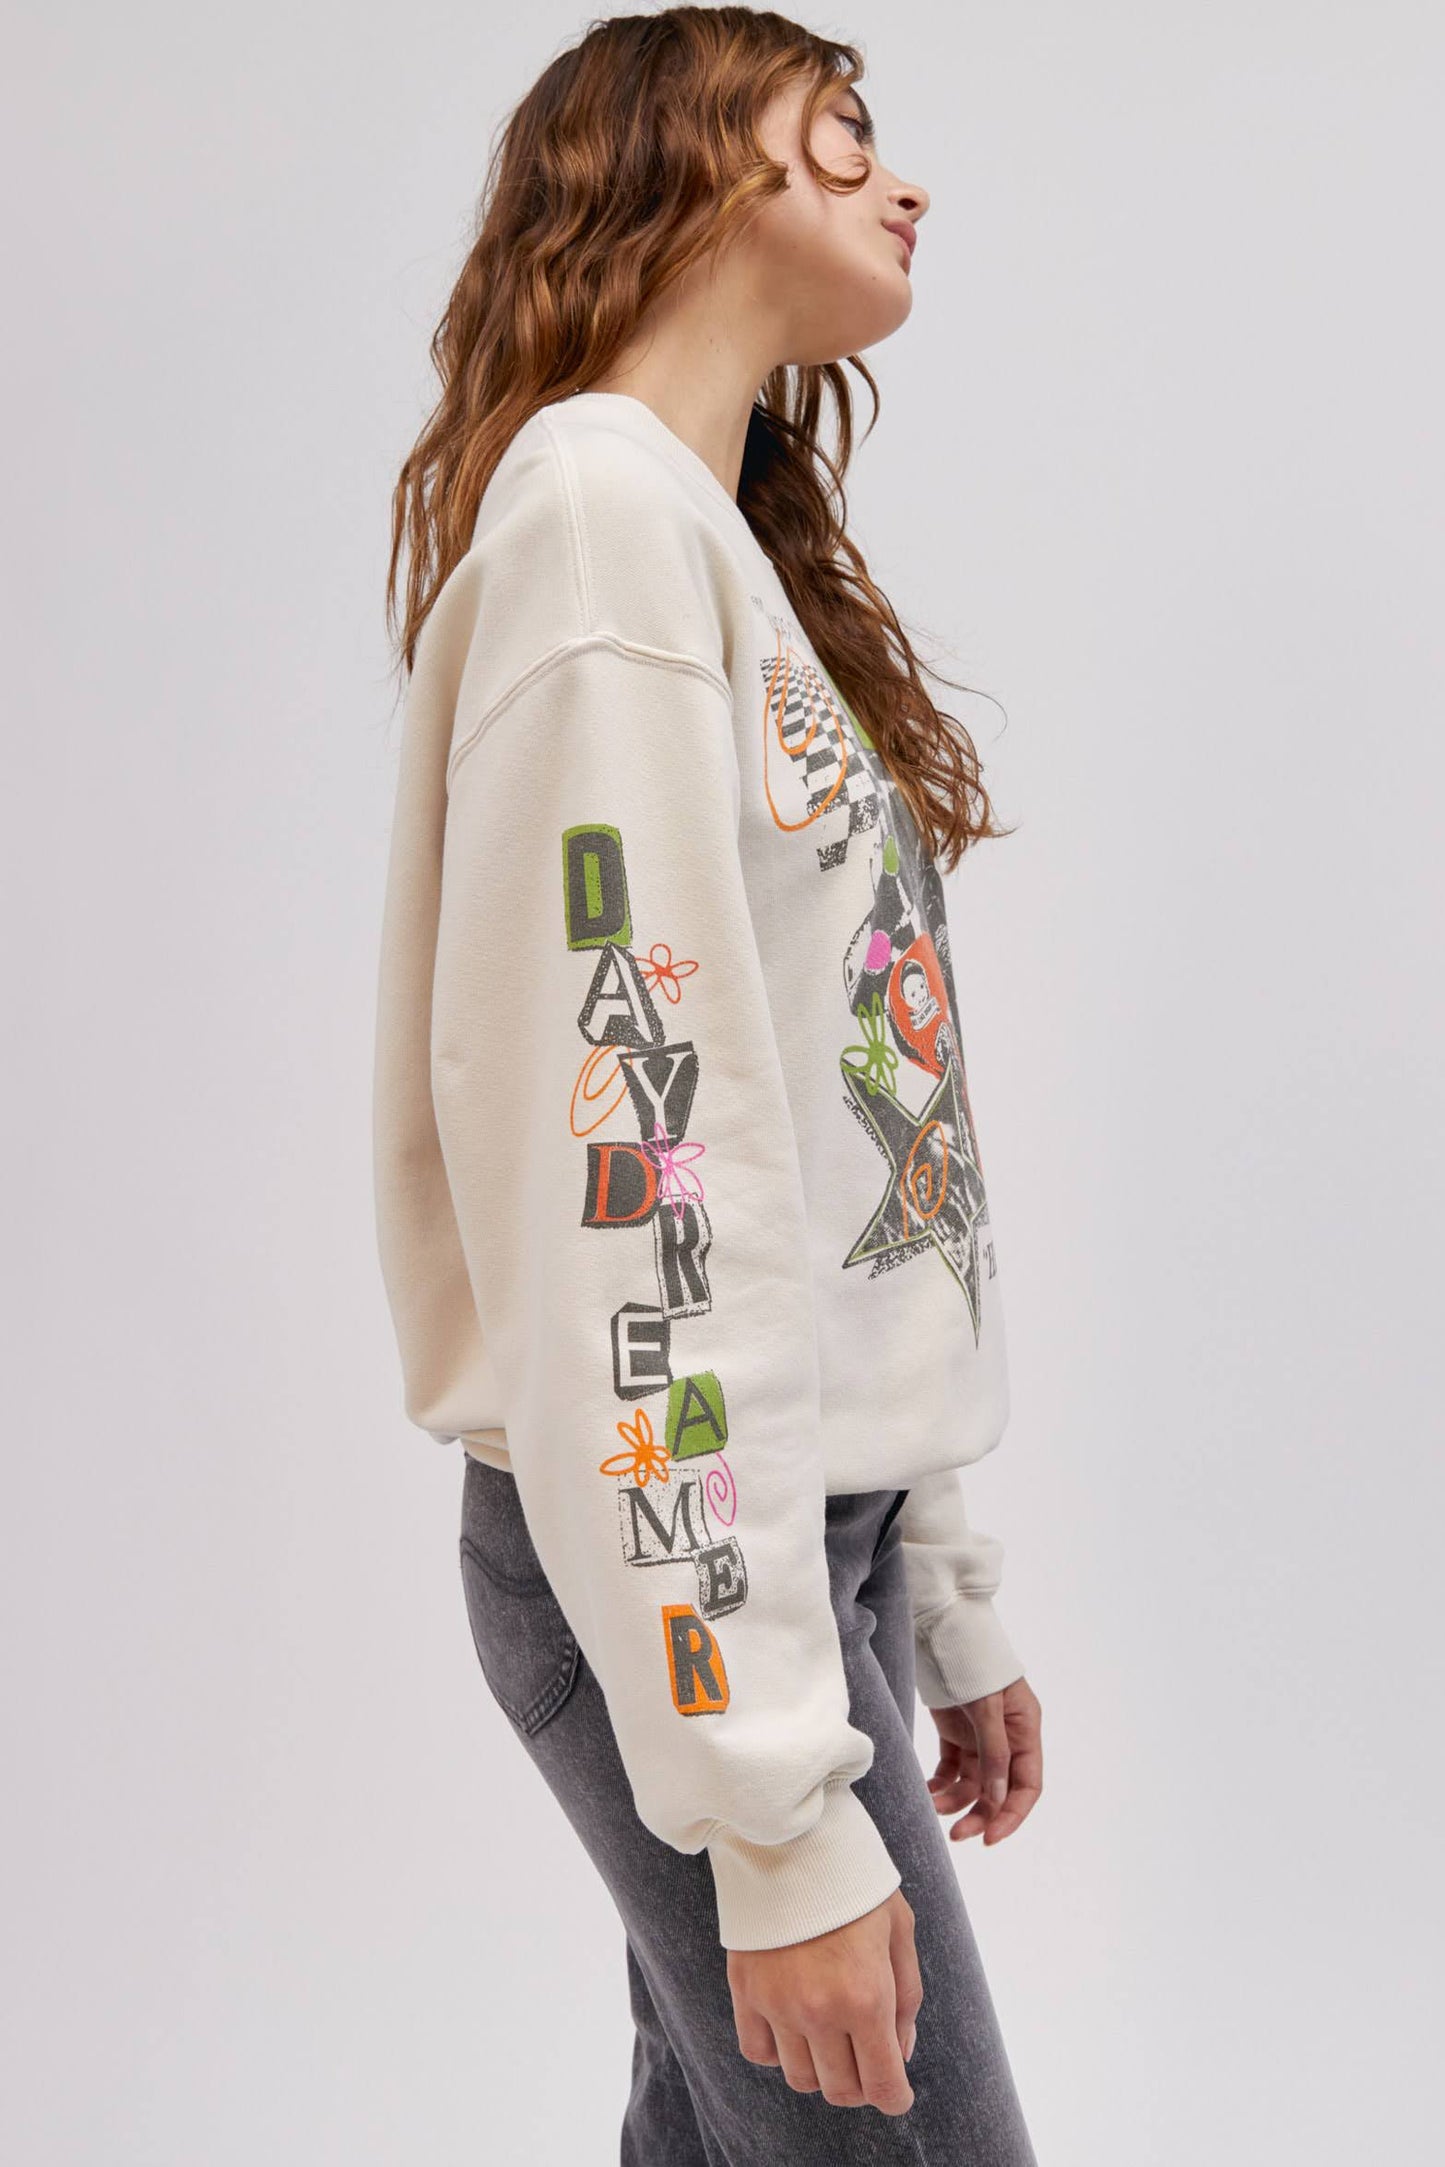 side profile pose of model wearing off white colored sweatshirt with graphics on the sleeve